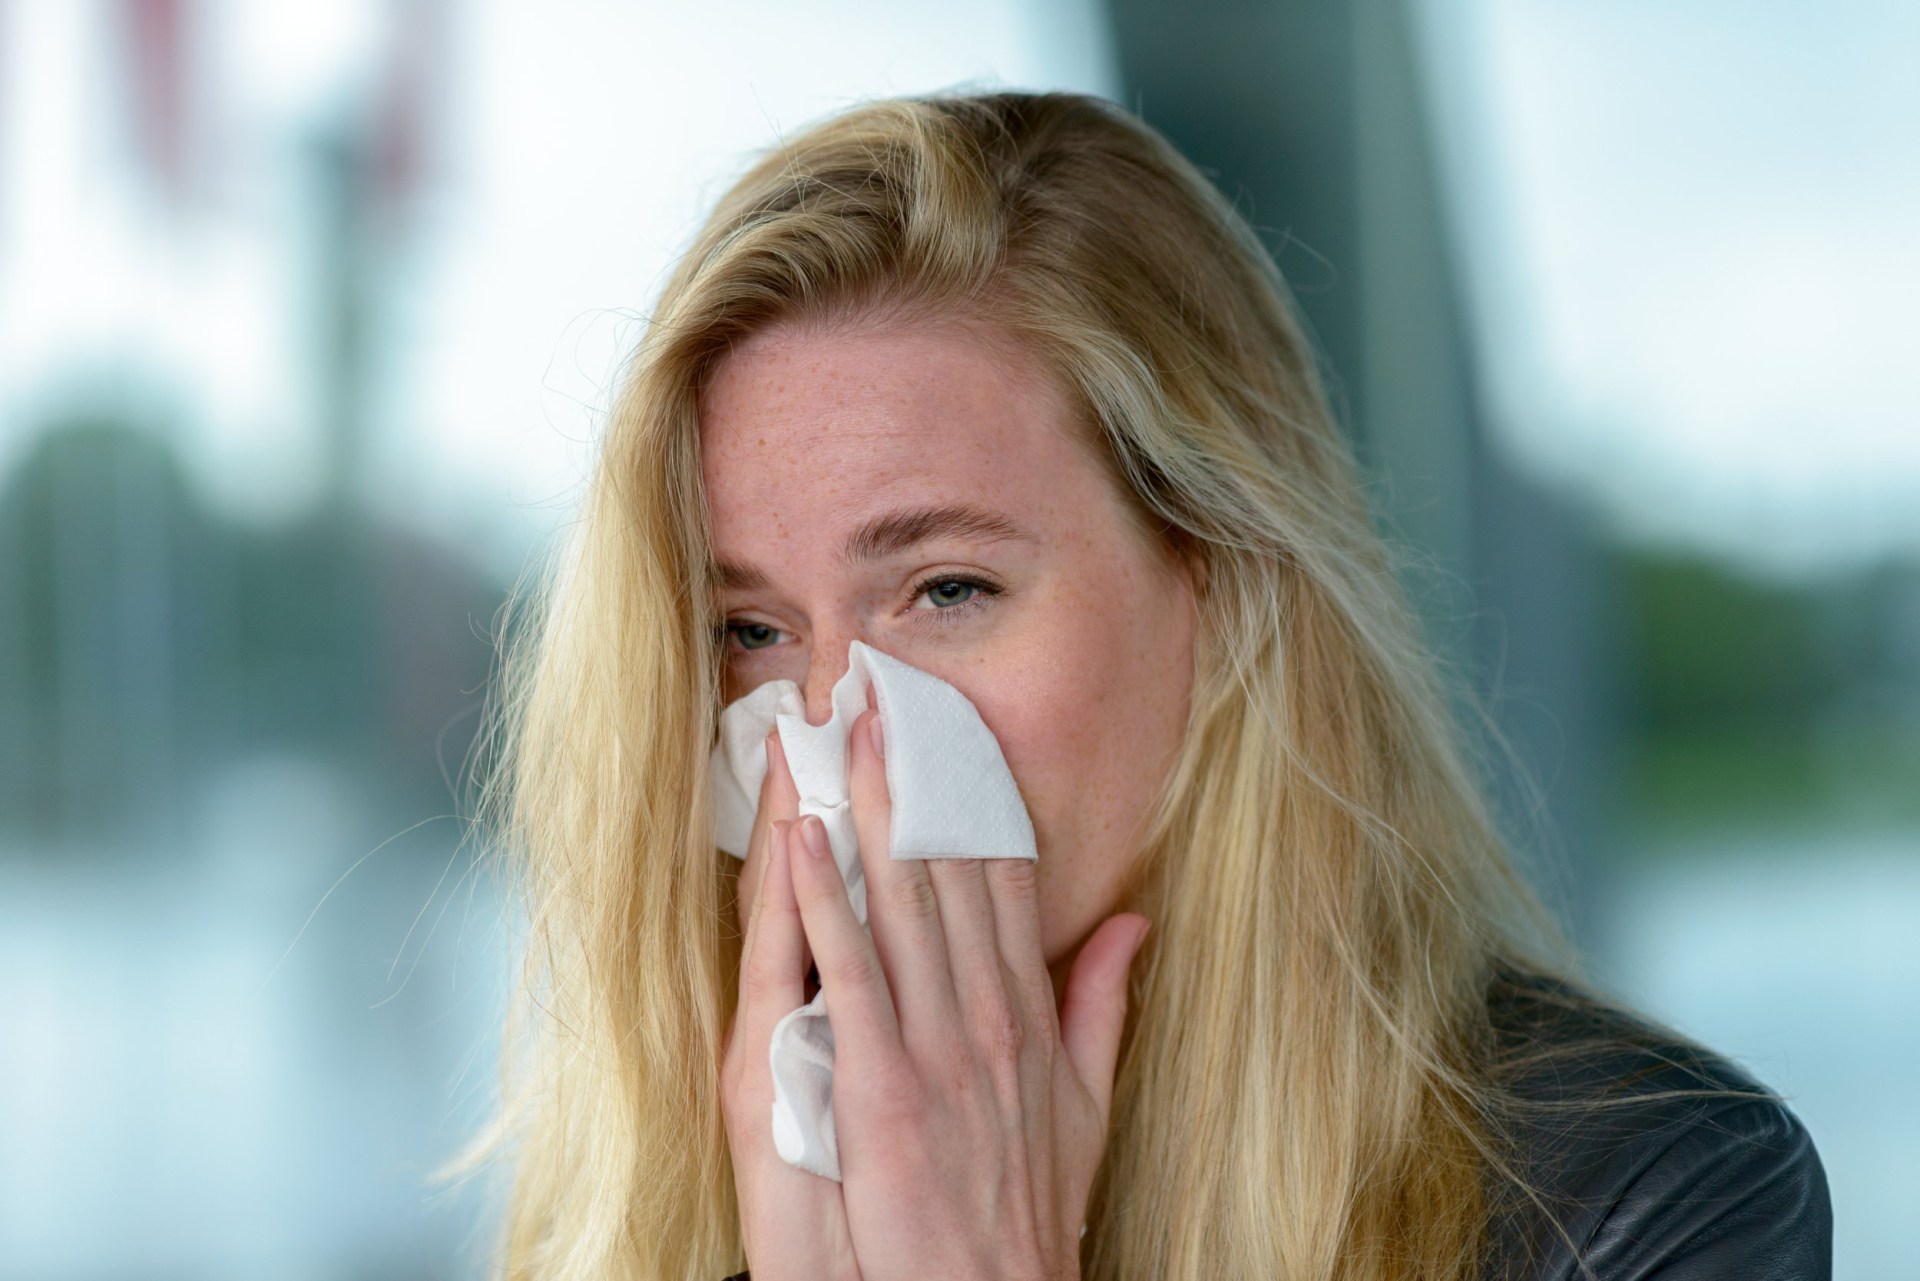 hayfever sufferers tormented early this year as balmy february triggers pollen boom